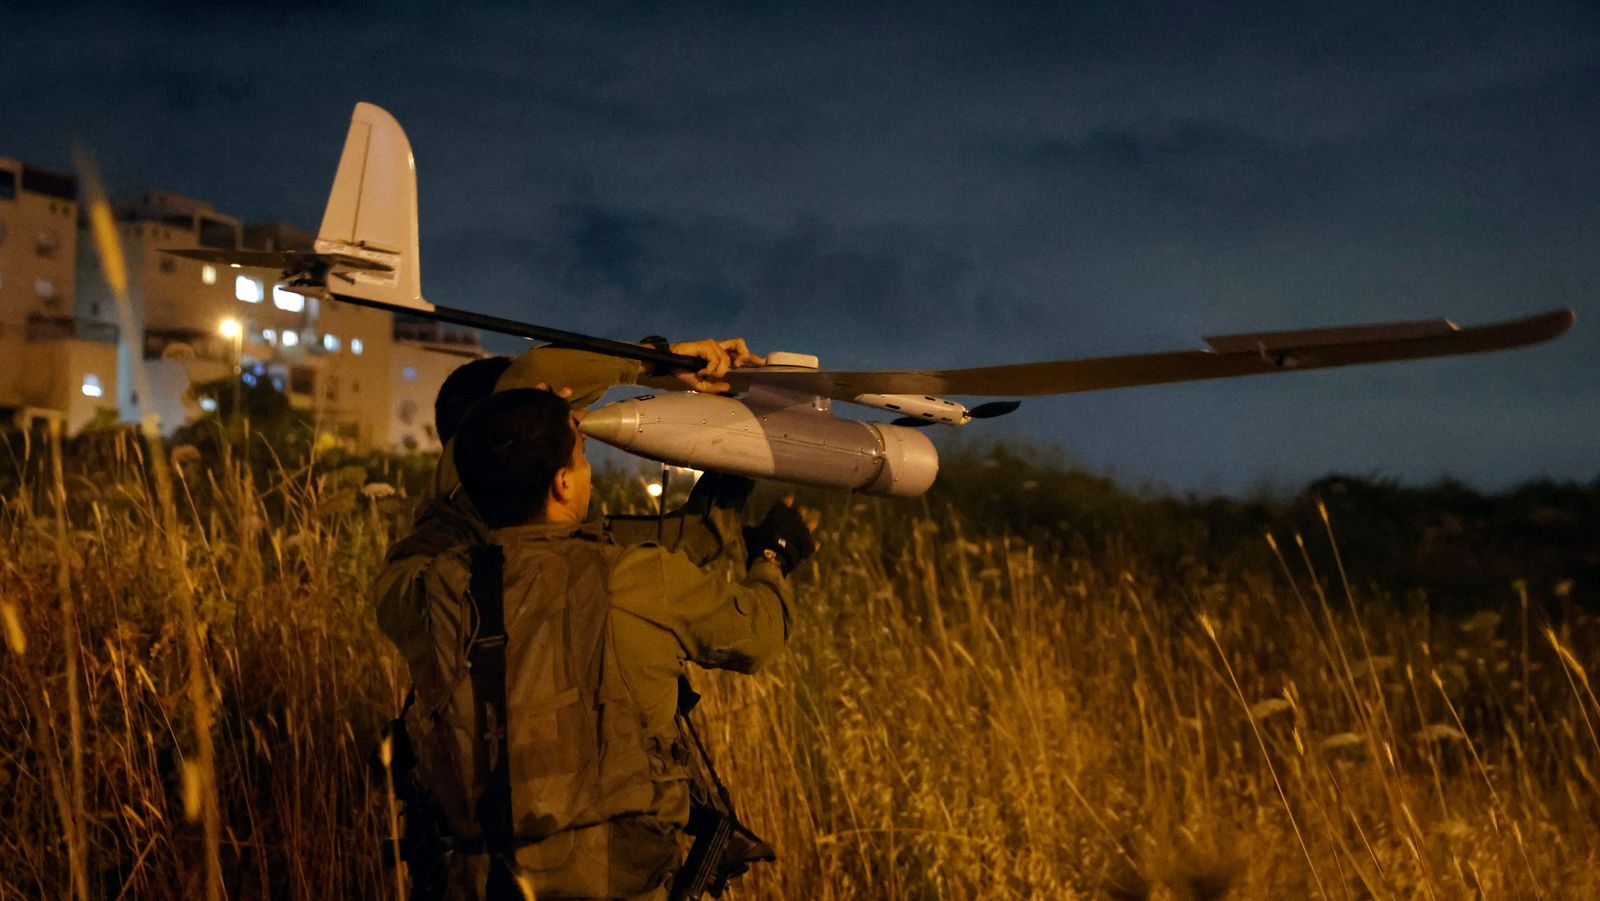 Israeli forces fly a drone to find the suspects of an attack in the central city of Elad, on May 5, 2022. - At least three people were killed in an attack in the central Israeli city of Elad as the Jewish state marked its independence day today, medics said. (Photo by JACK GUEZ / AFP) - AFP